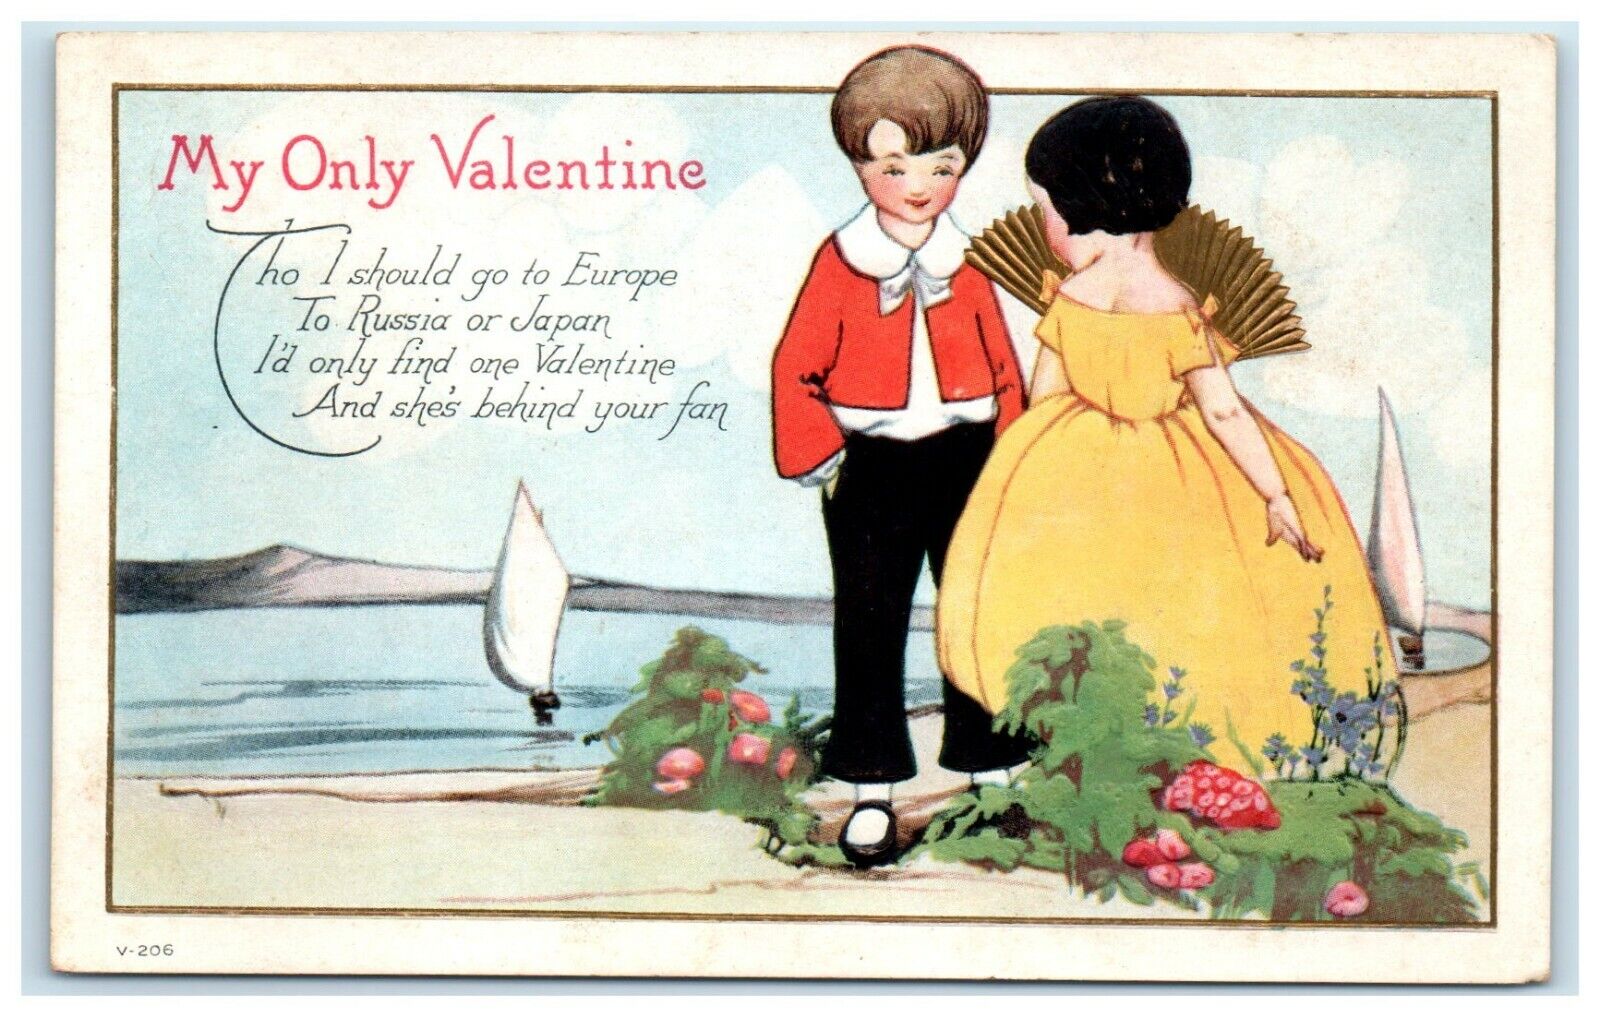 POSTCARD Vintage Valentines Embossed Tho I should go to Europe Russia Japan Boat